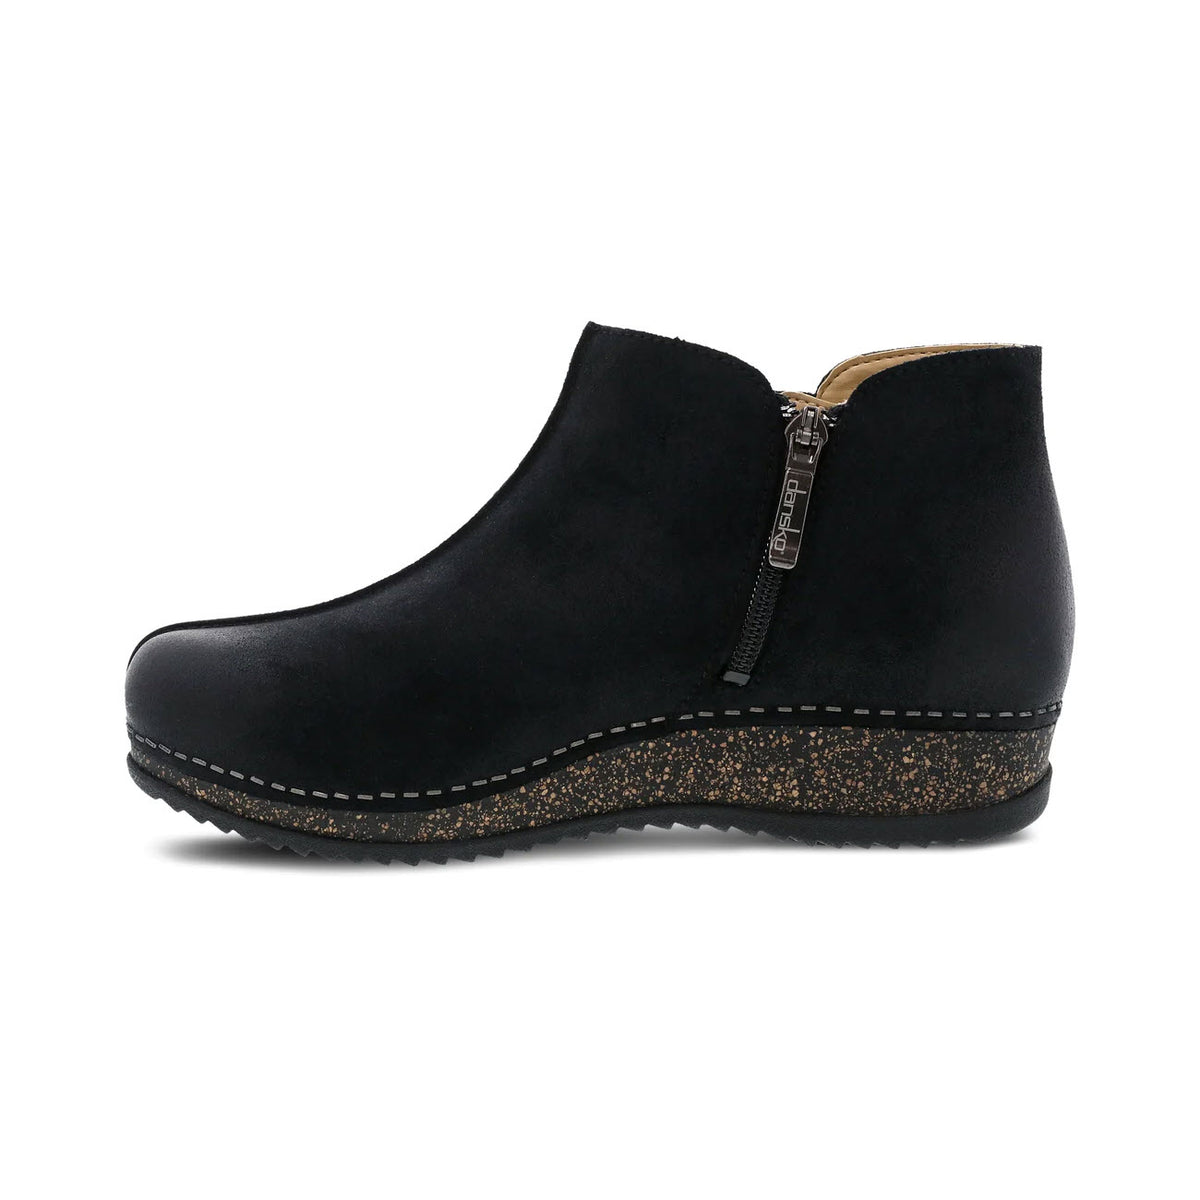 Black suede Dansko Makara bootie with a side zipper and a speckled platform sole, viewed from the side on a white background.